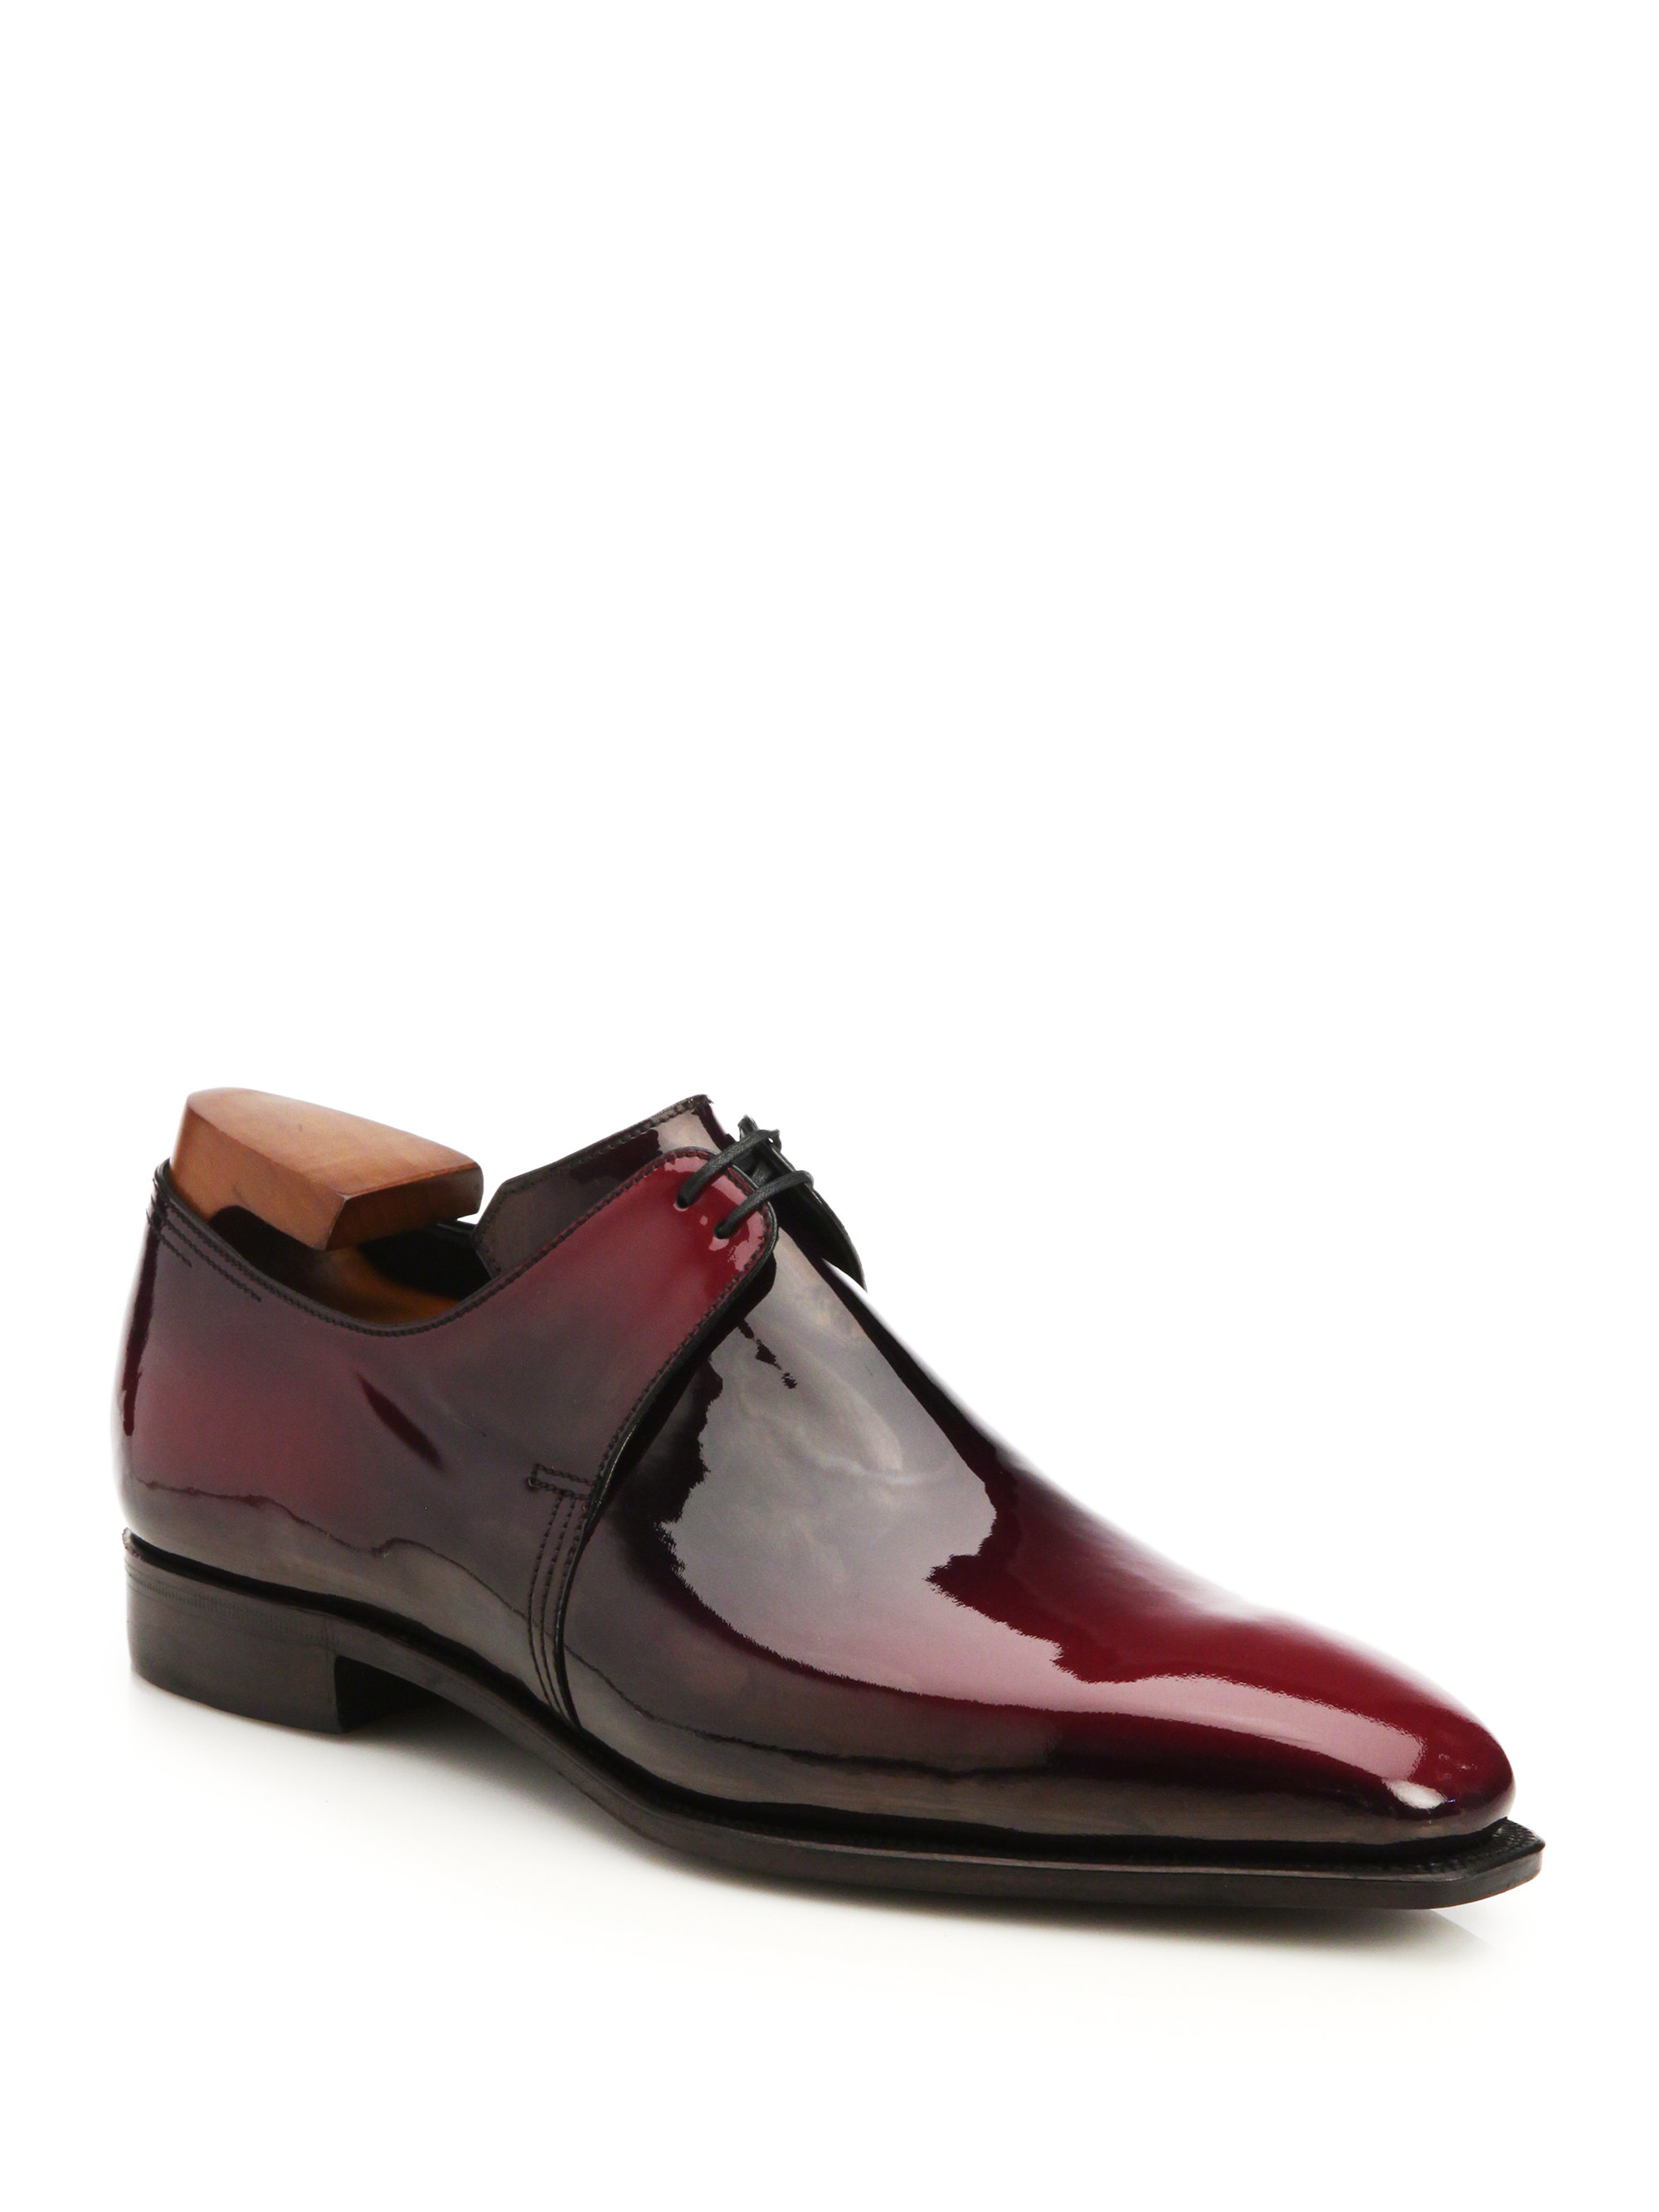 Corthay Arca Patent Leather Derby Shoes in Red for Men - Lyst